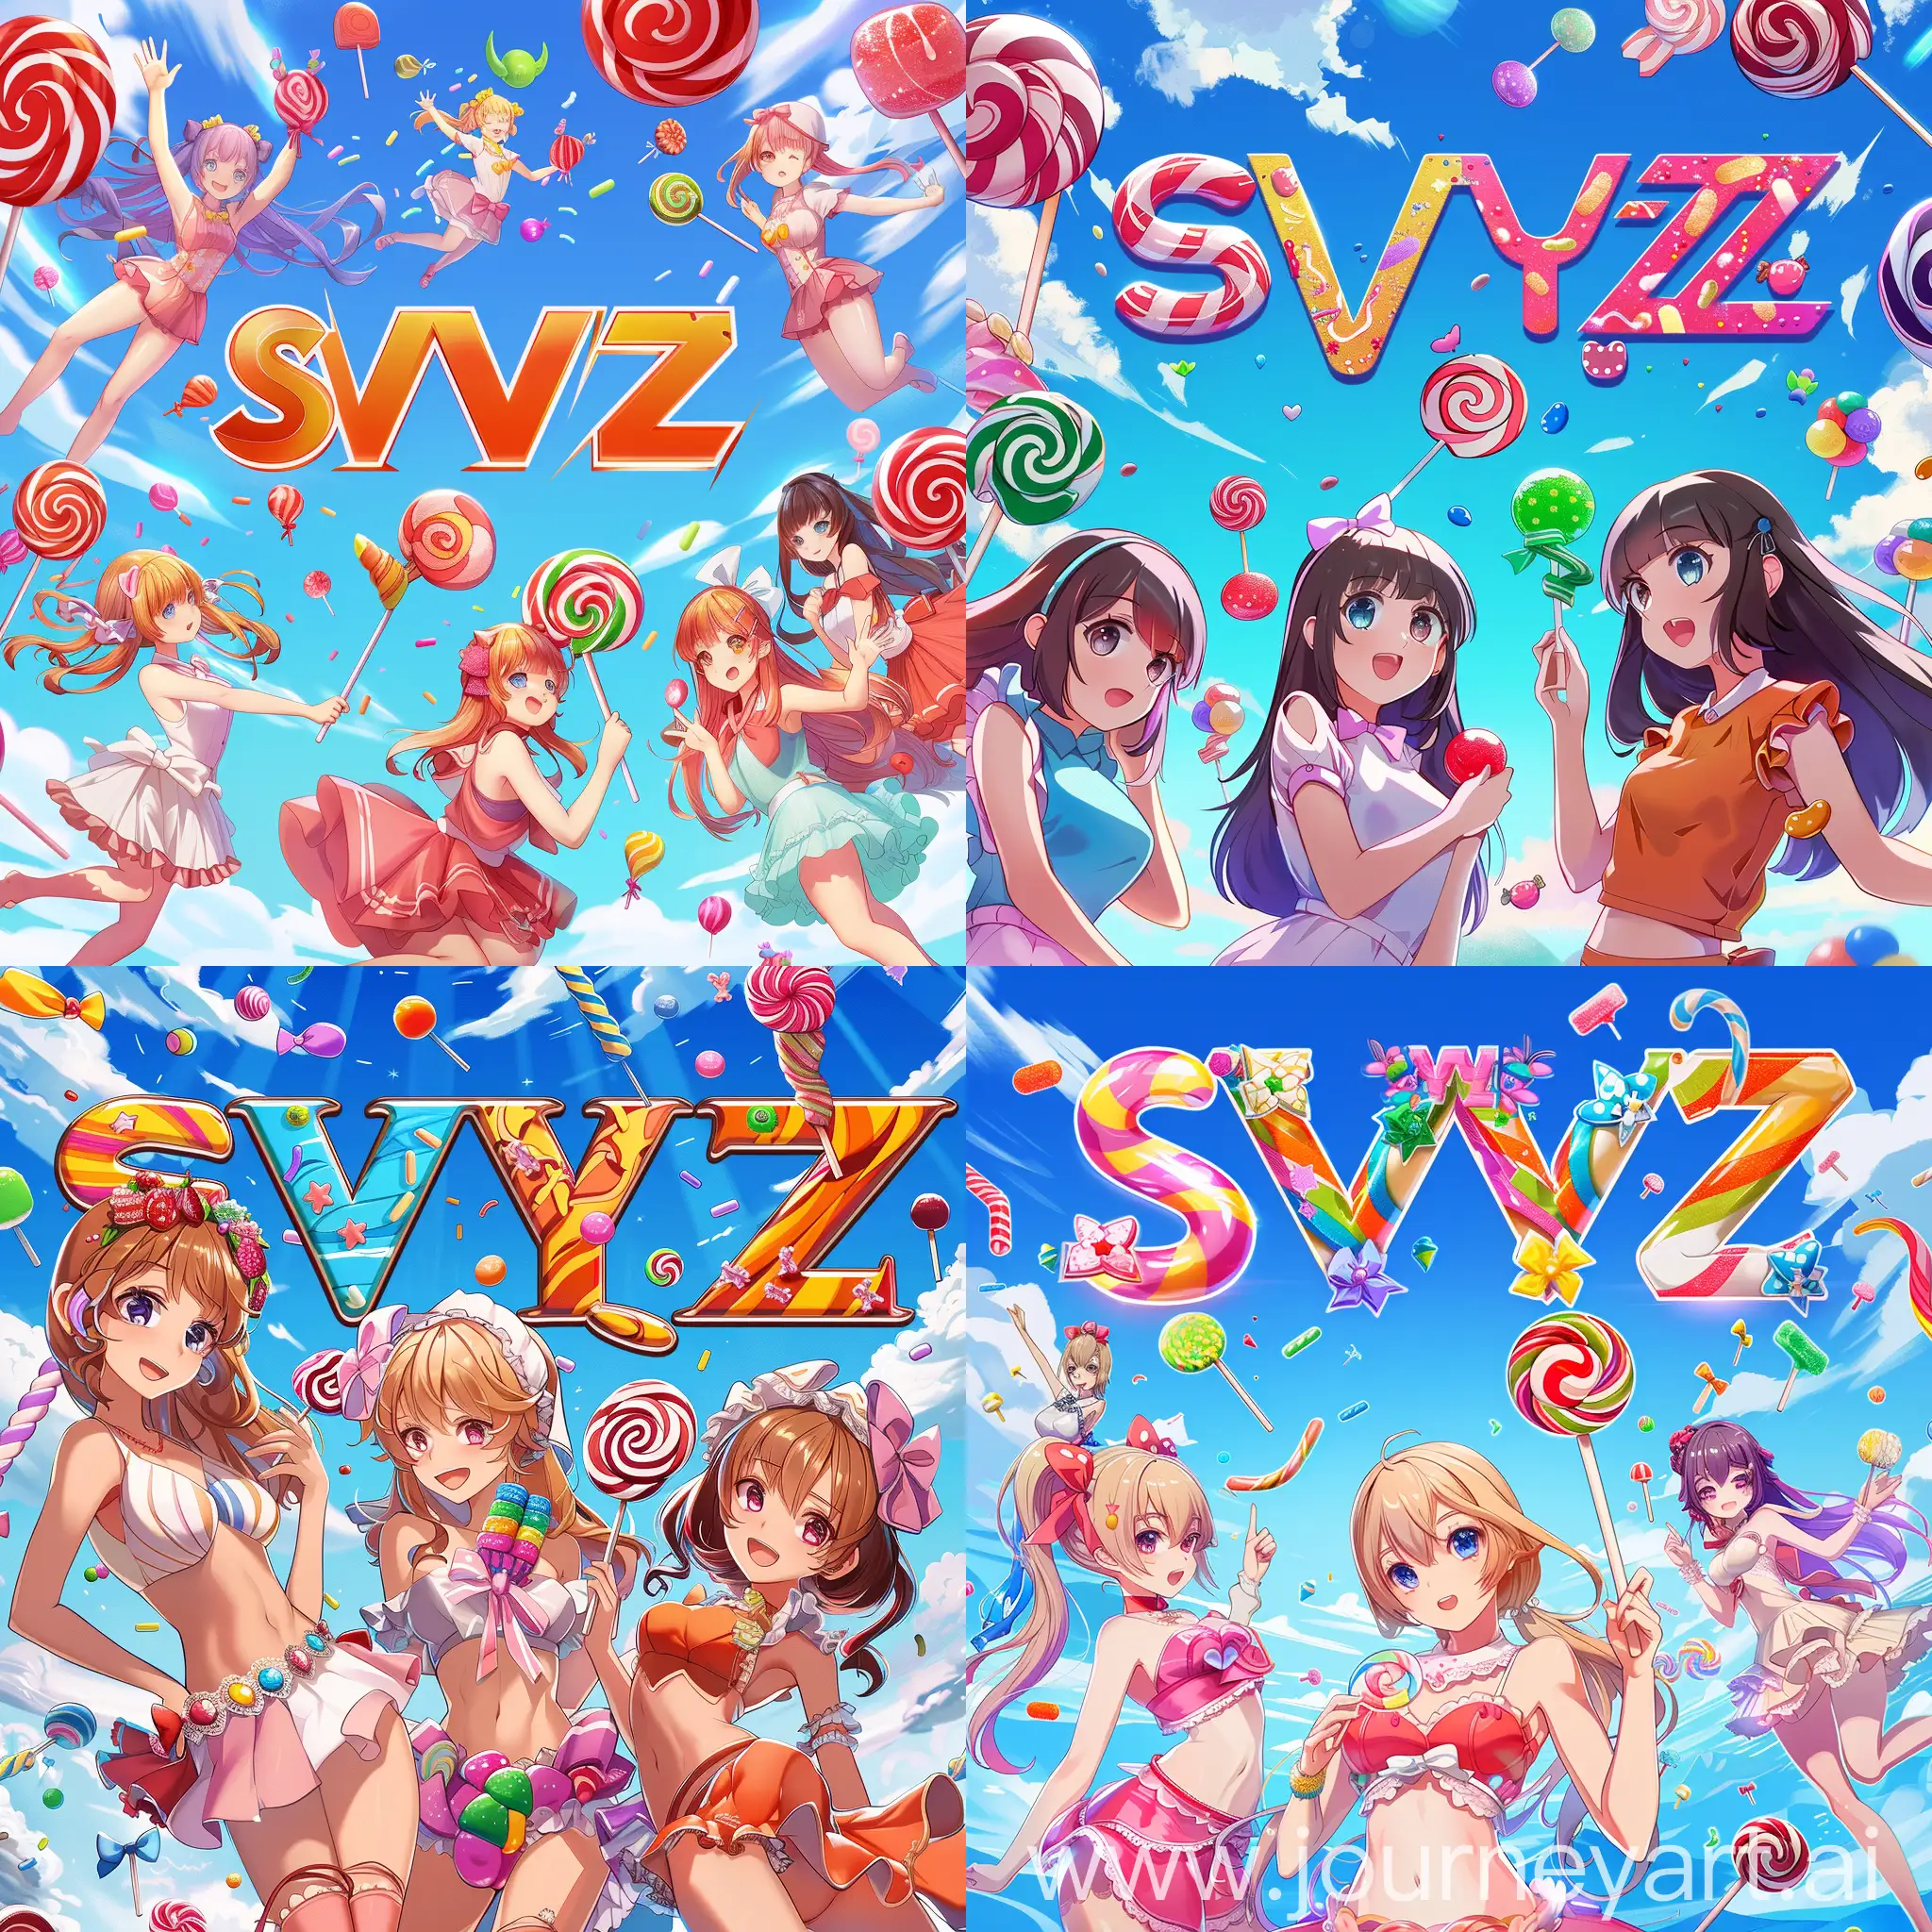 SVYAZ-Logo-with-Colorful-Anime-Girls-and-Flying-Candies